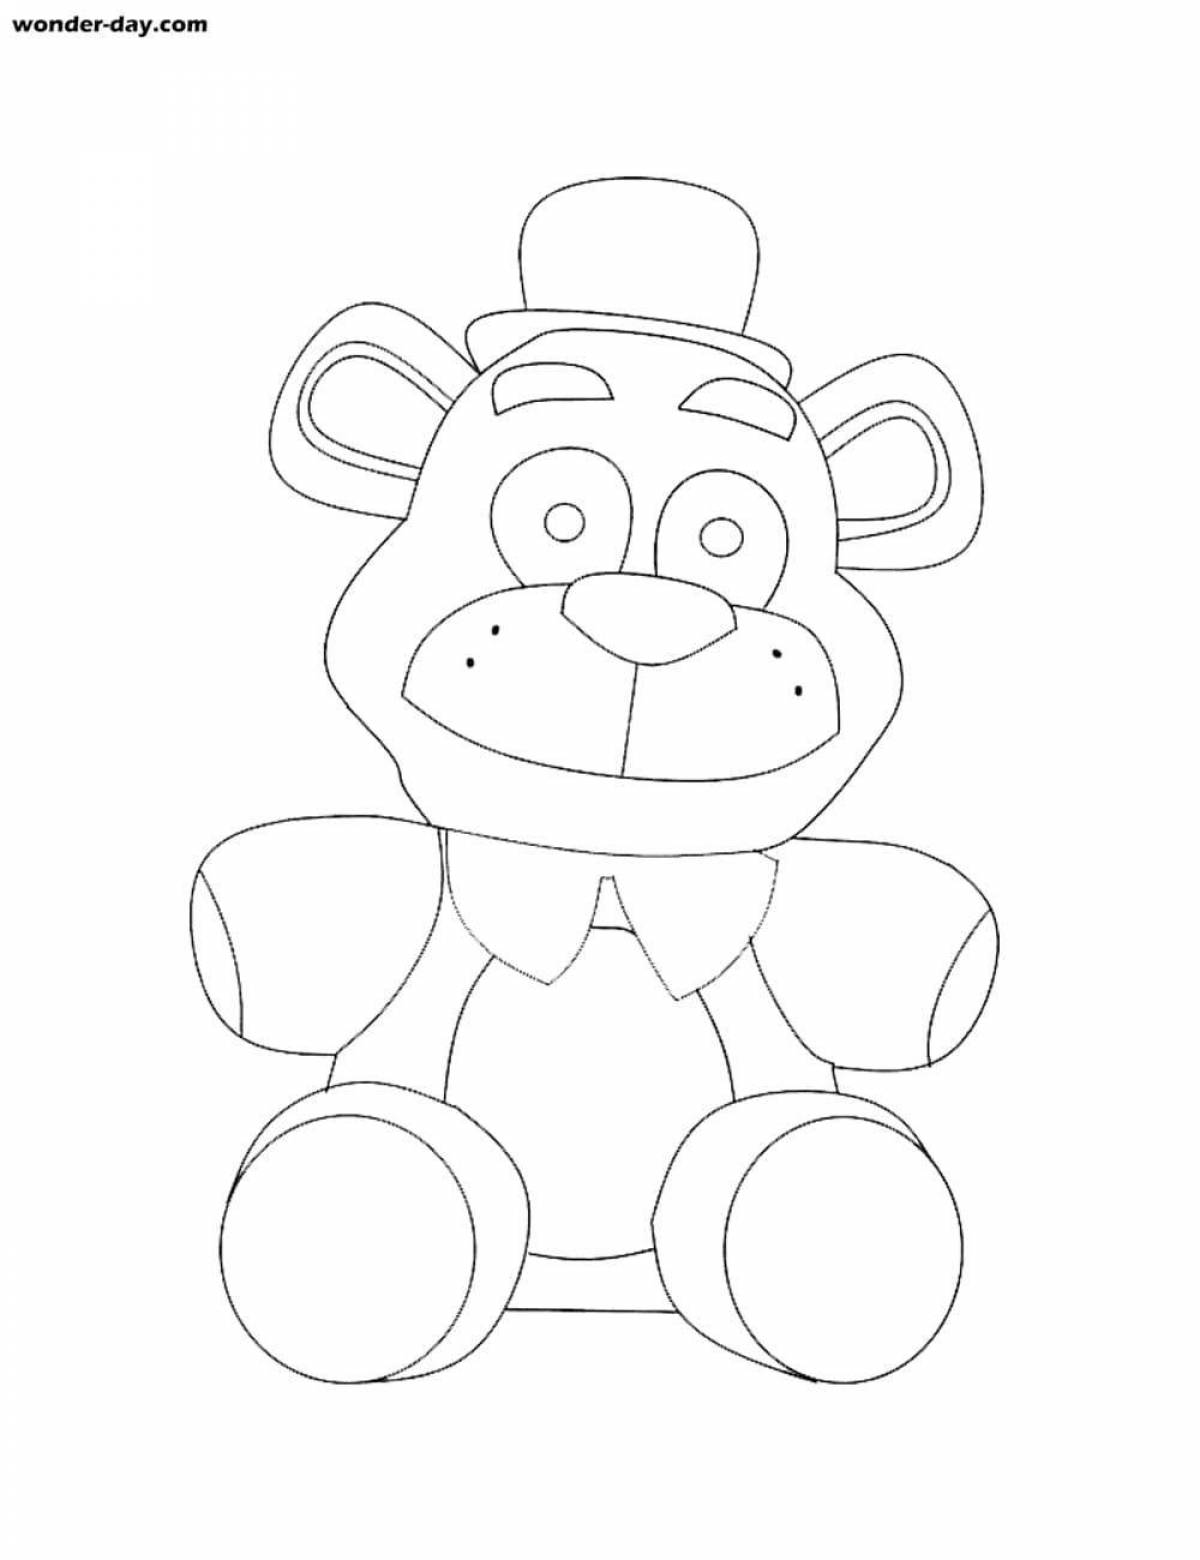 Outstanding freddy bear coloring book for kids